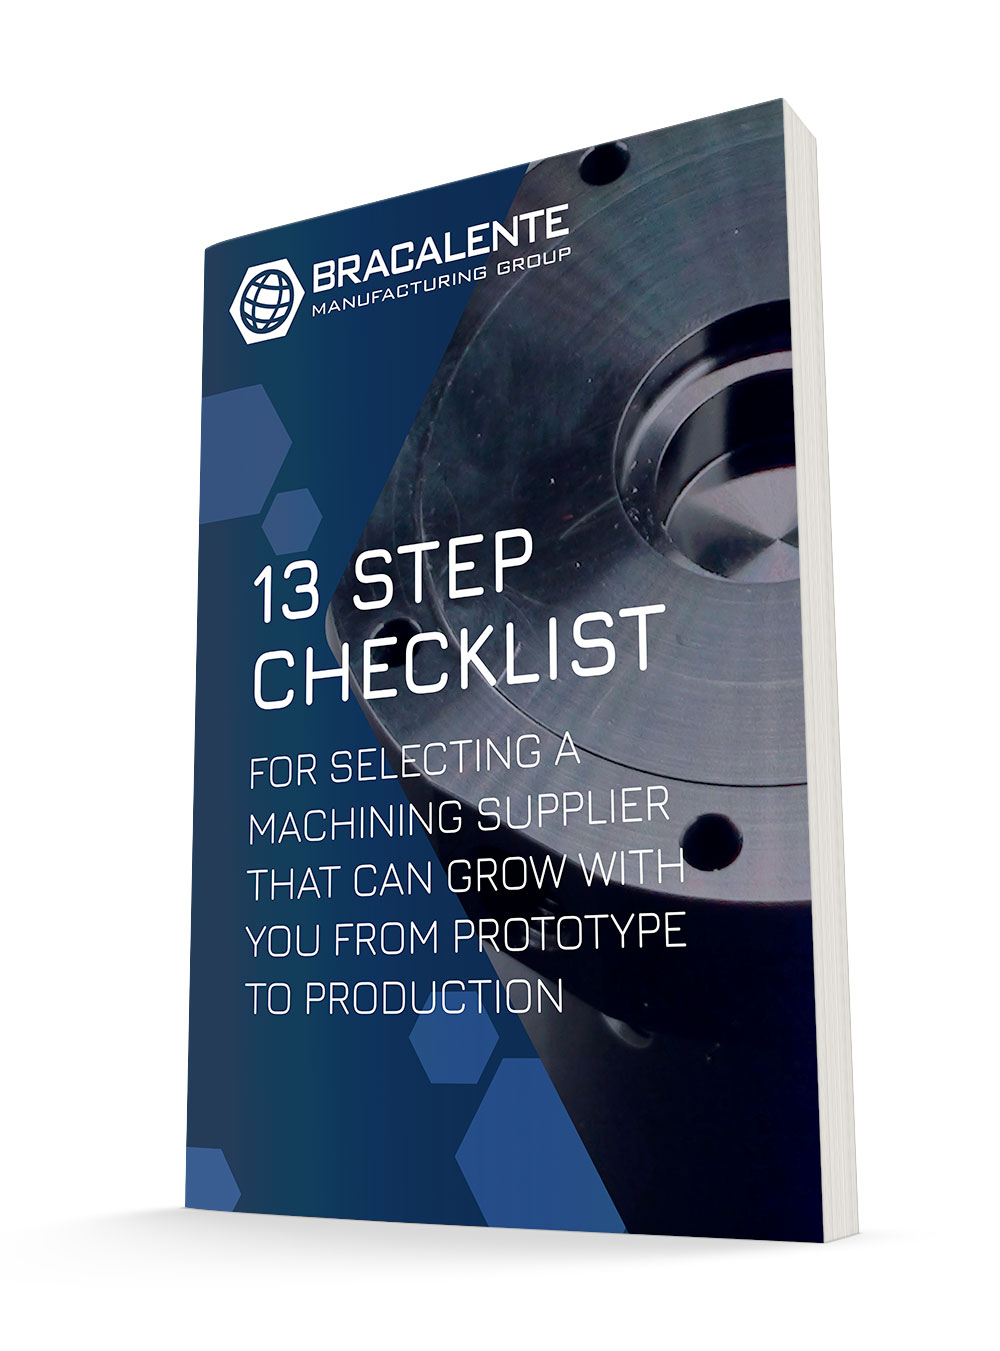 13 Step Checklist for Selecting a Machining Supplier That Can Grow With You From Prototype to Production